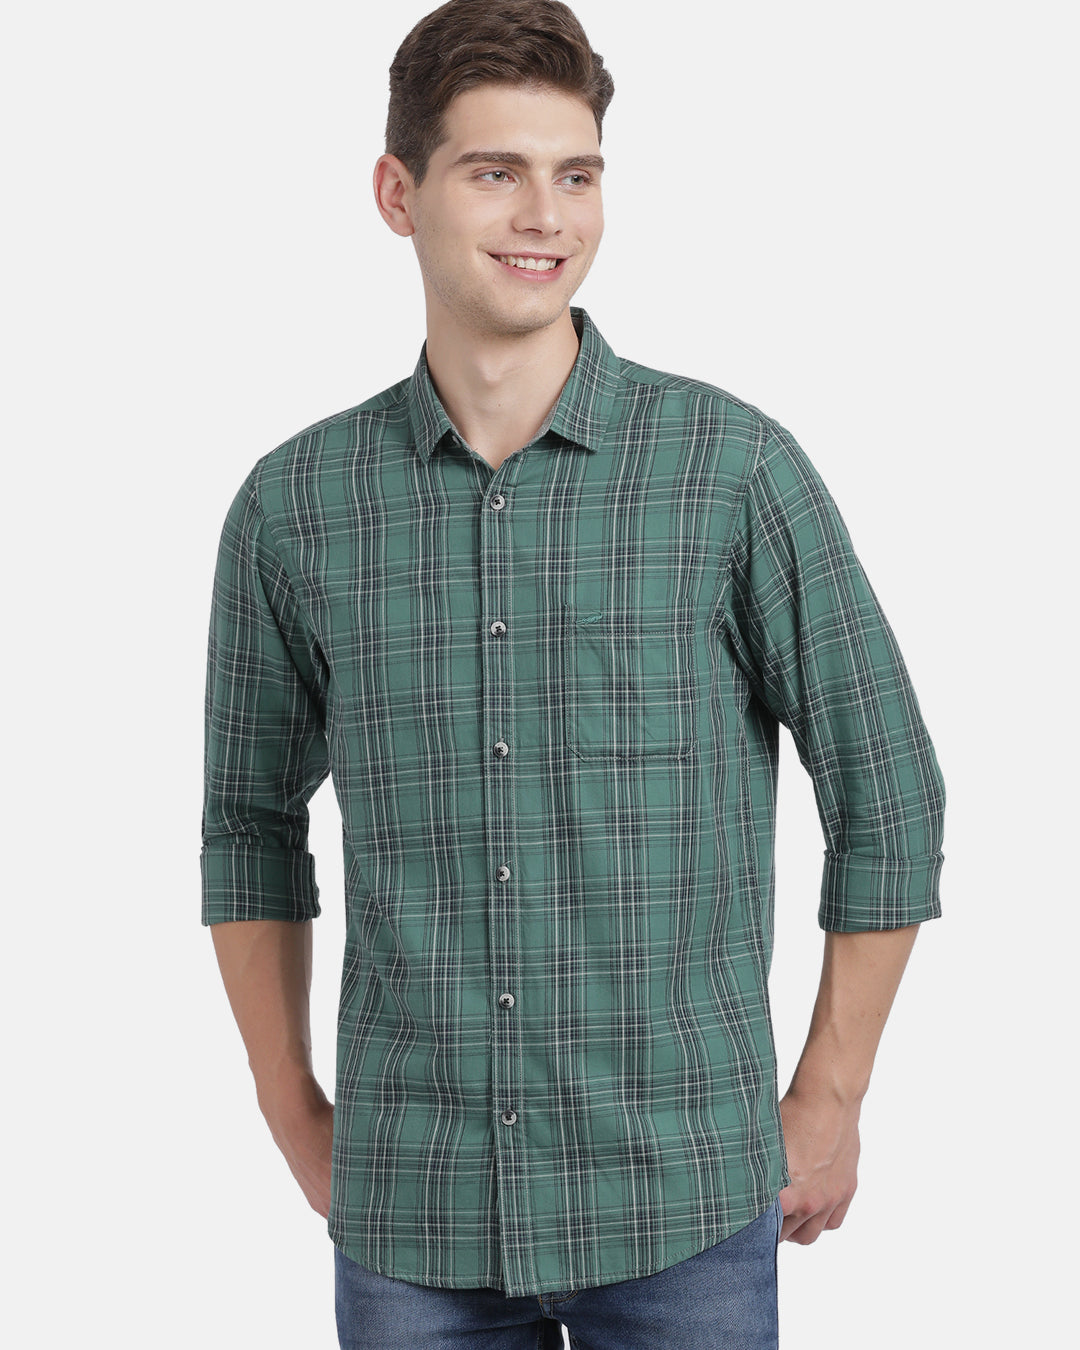 Crocodile Men's Casual Full Sleeve Slim Fit Checks Green With Collar Shirt Online